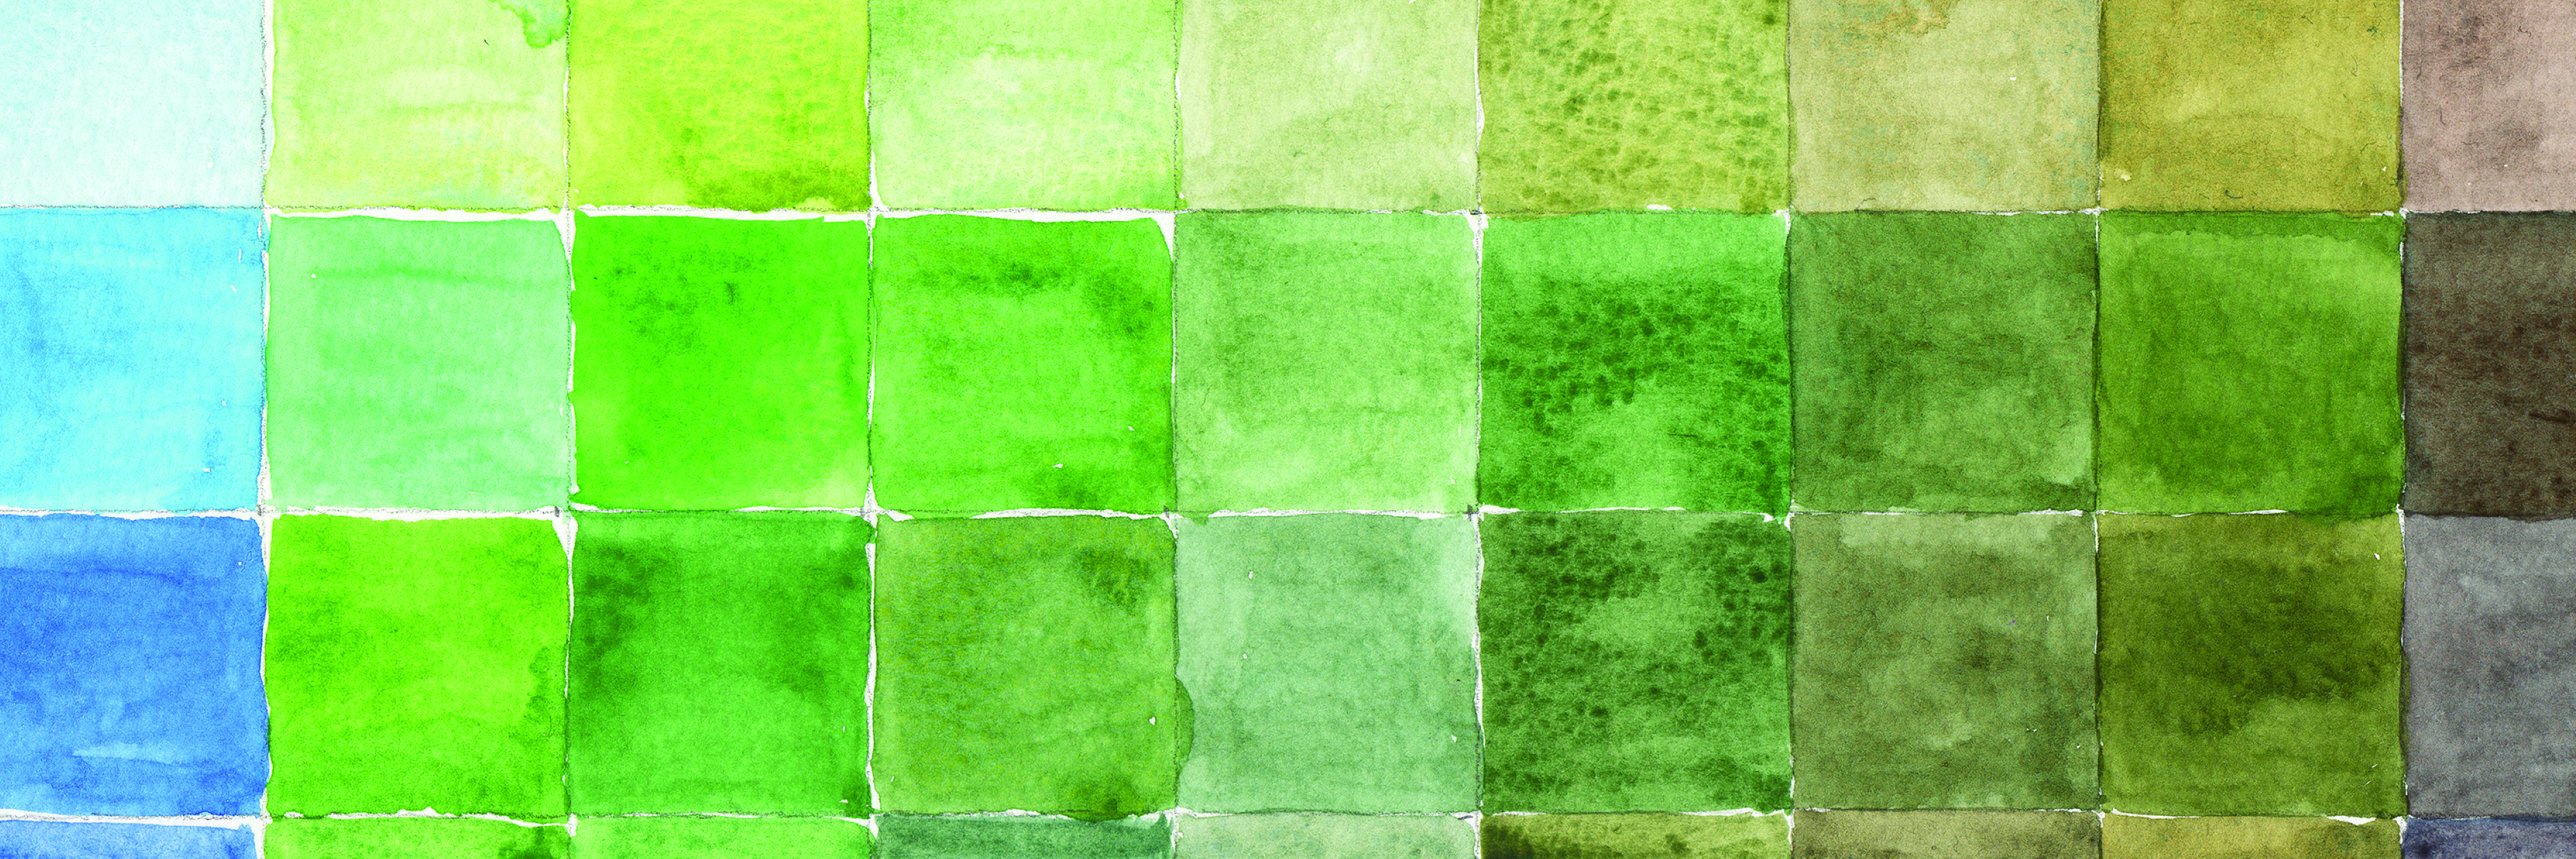 Image of a grid of watercolor squares